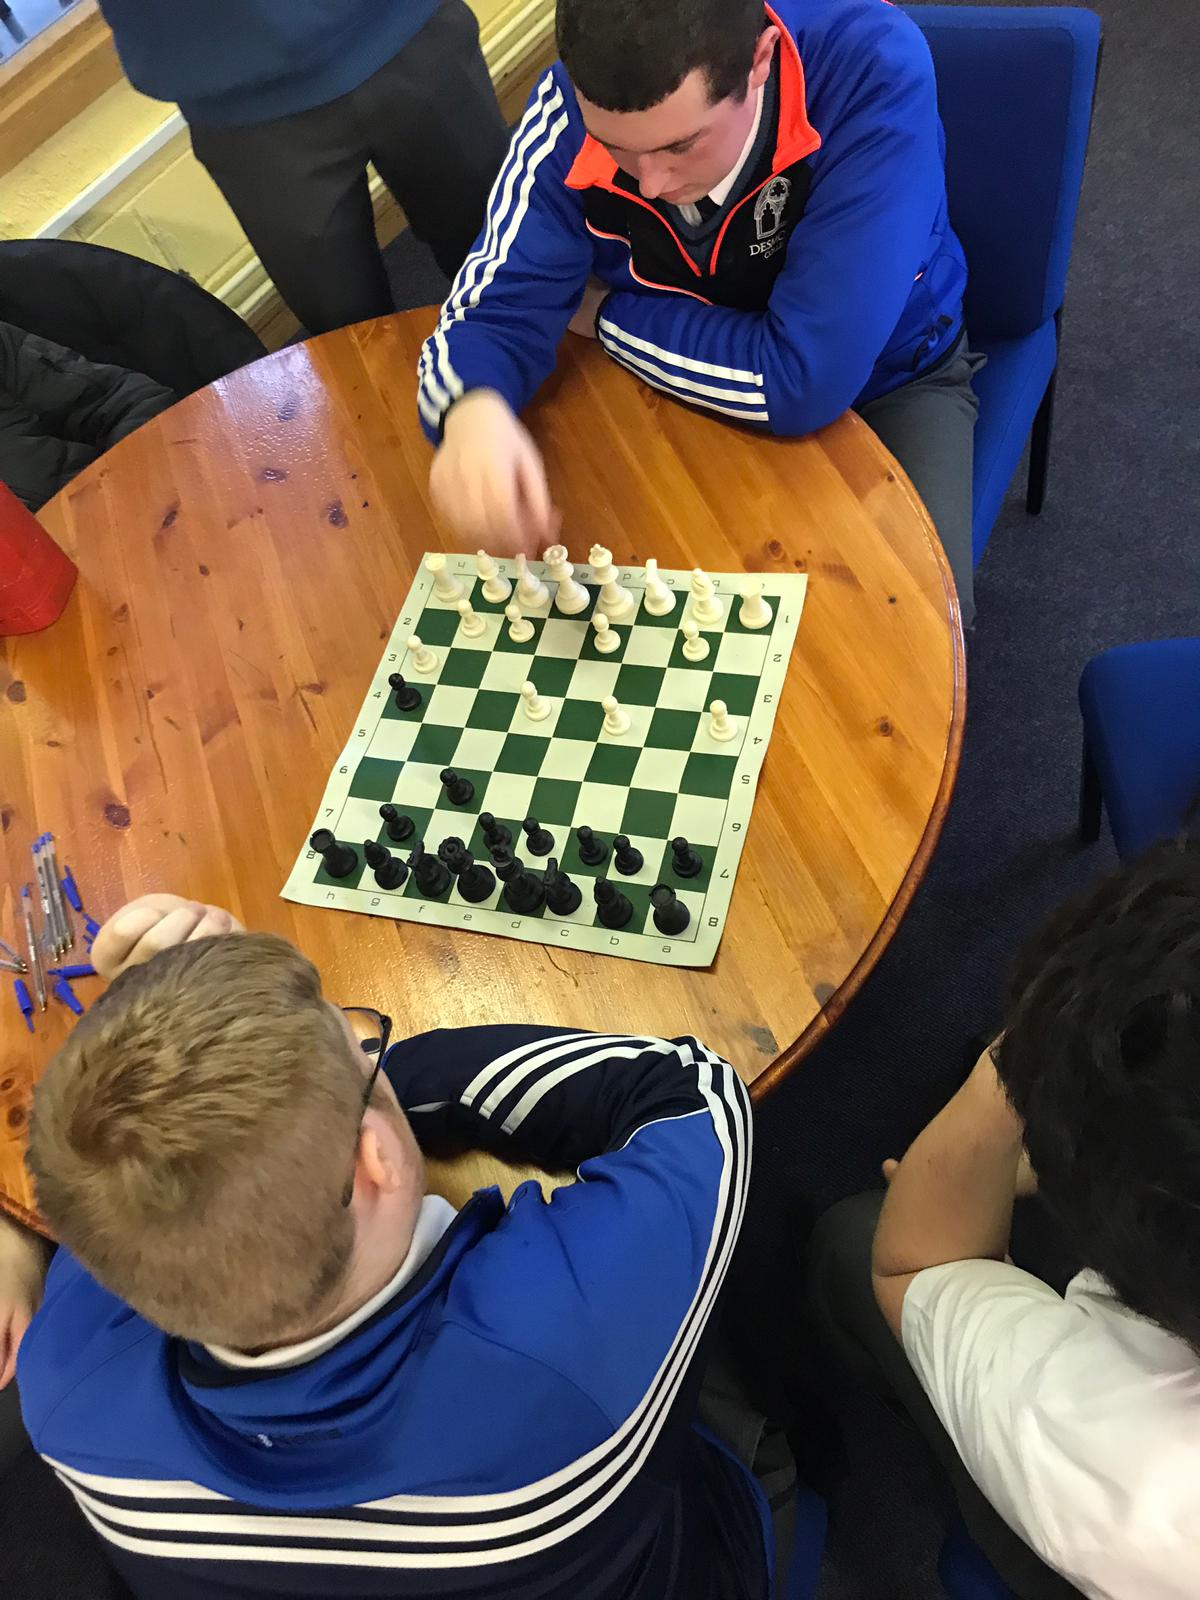 Evan Condon and AJ Dee enjoying a chess game at lunchtime